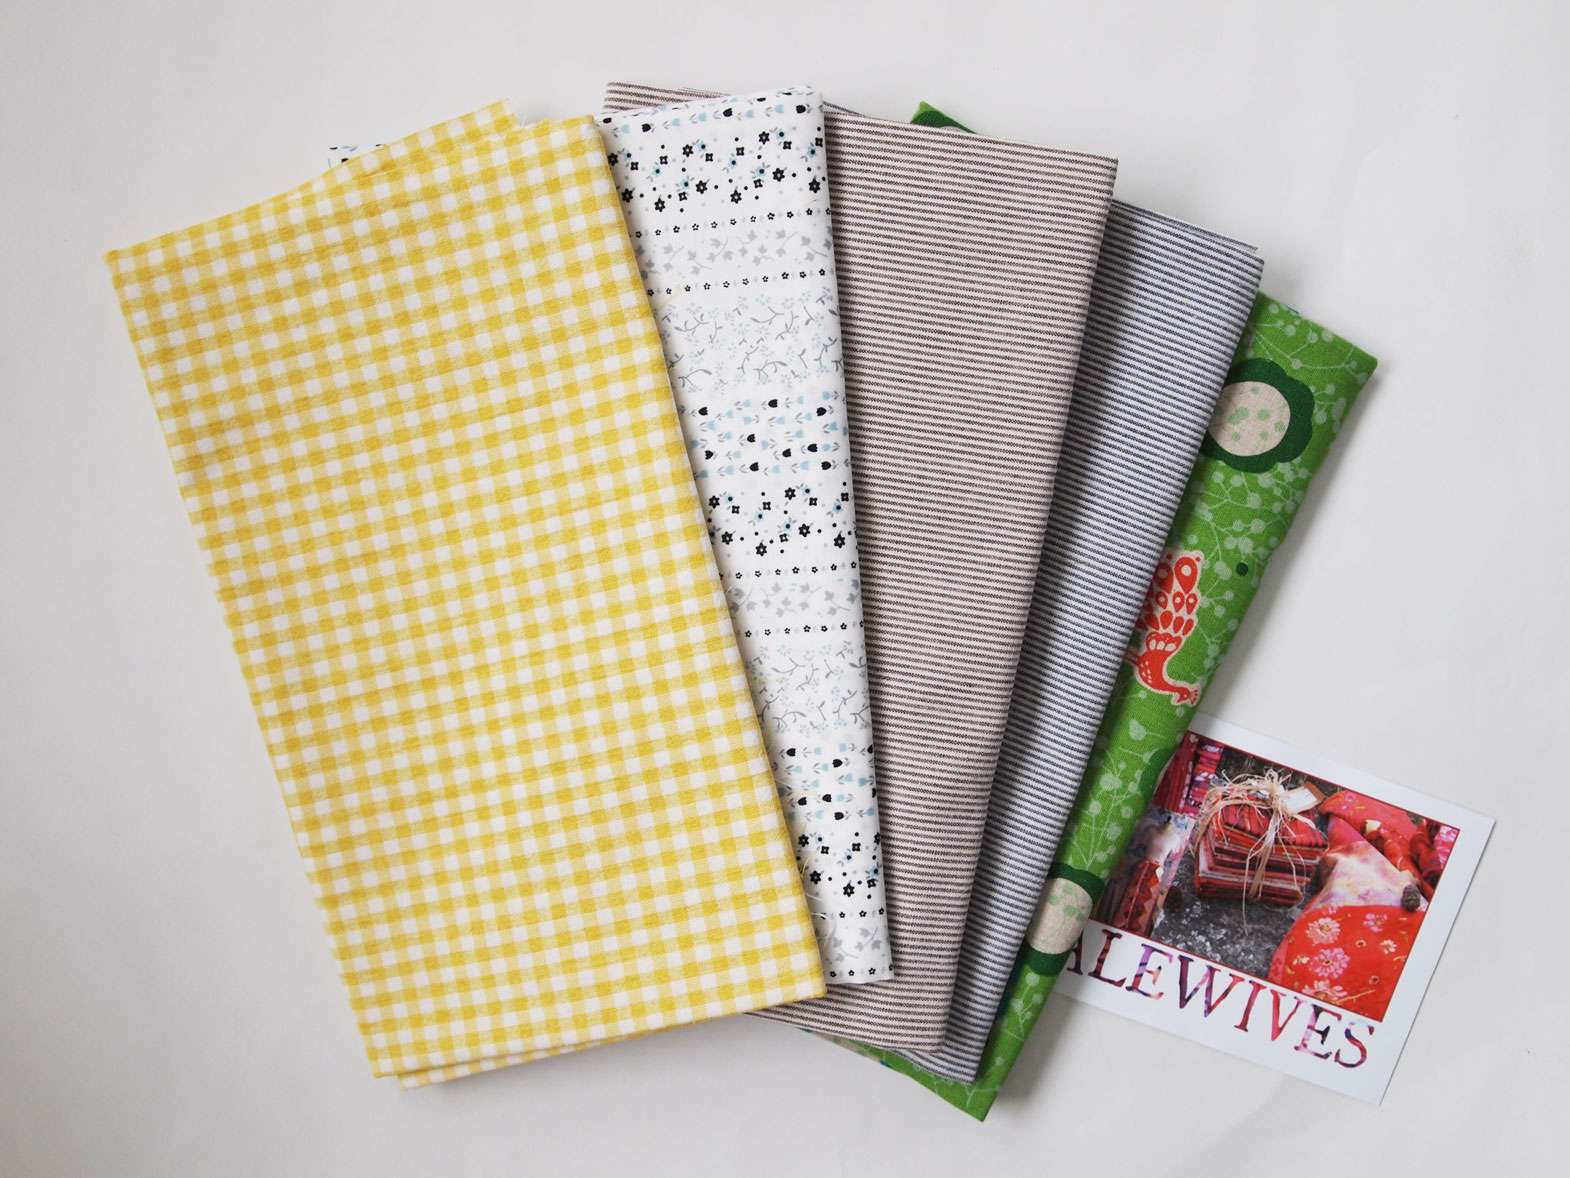 fabrics from Alewives